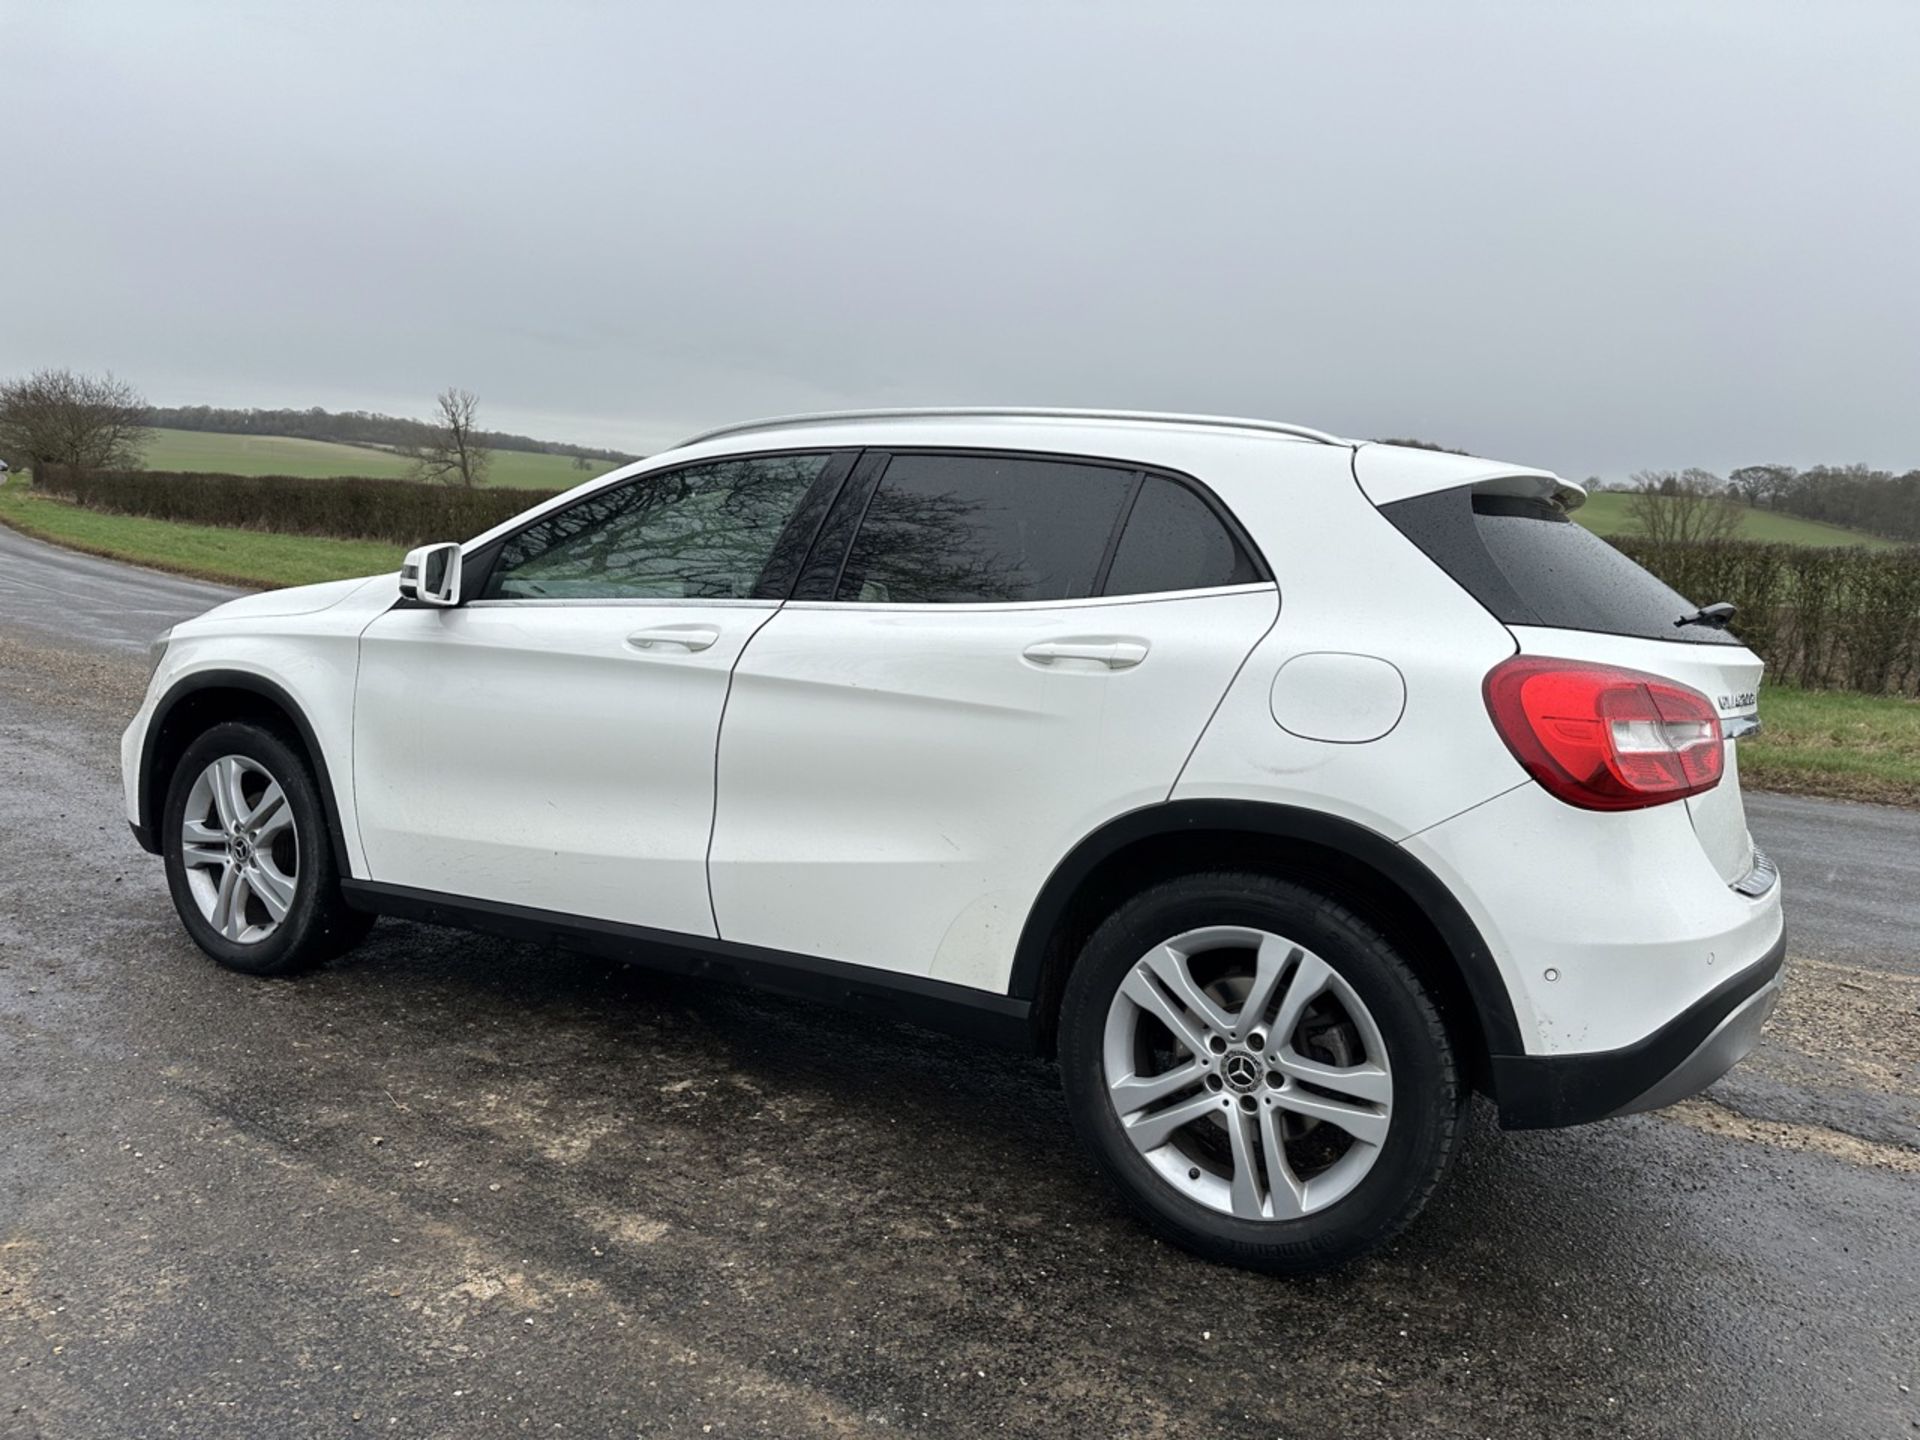 MERCEDES GLA 200d AUTO "SPORT EXECUTIVE" 2019 MODEL - LEATHER - LOW MILES - AIR CON - Image 5 of 17